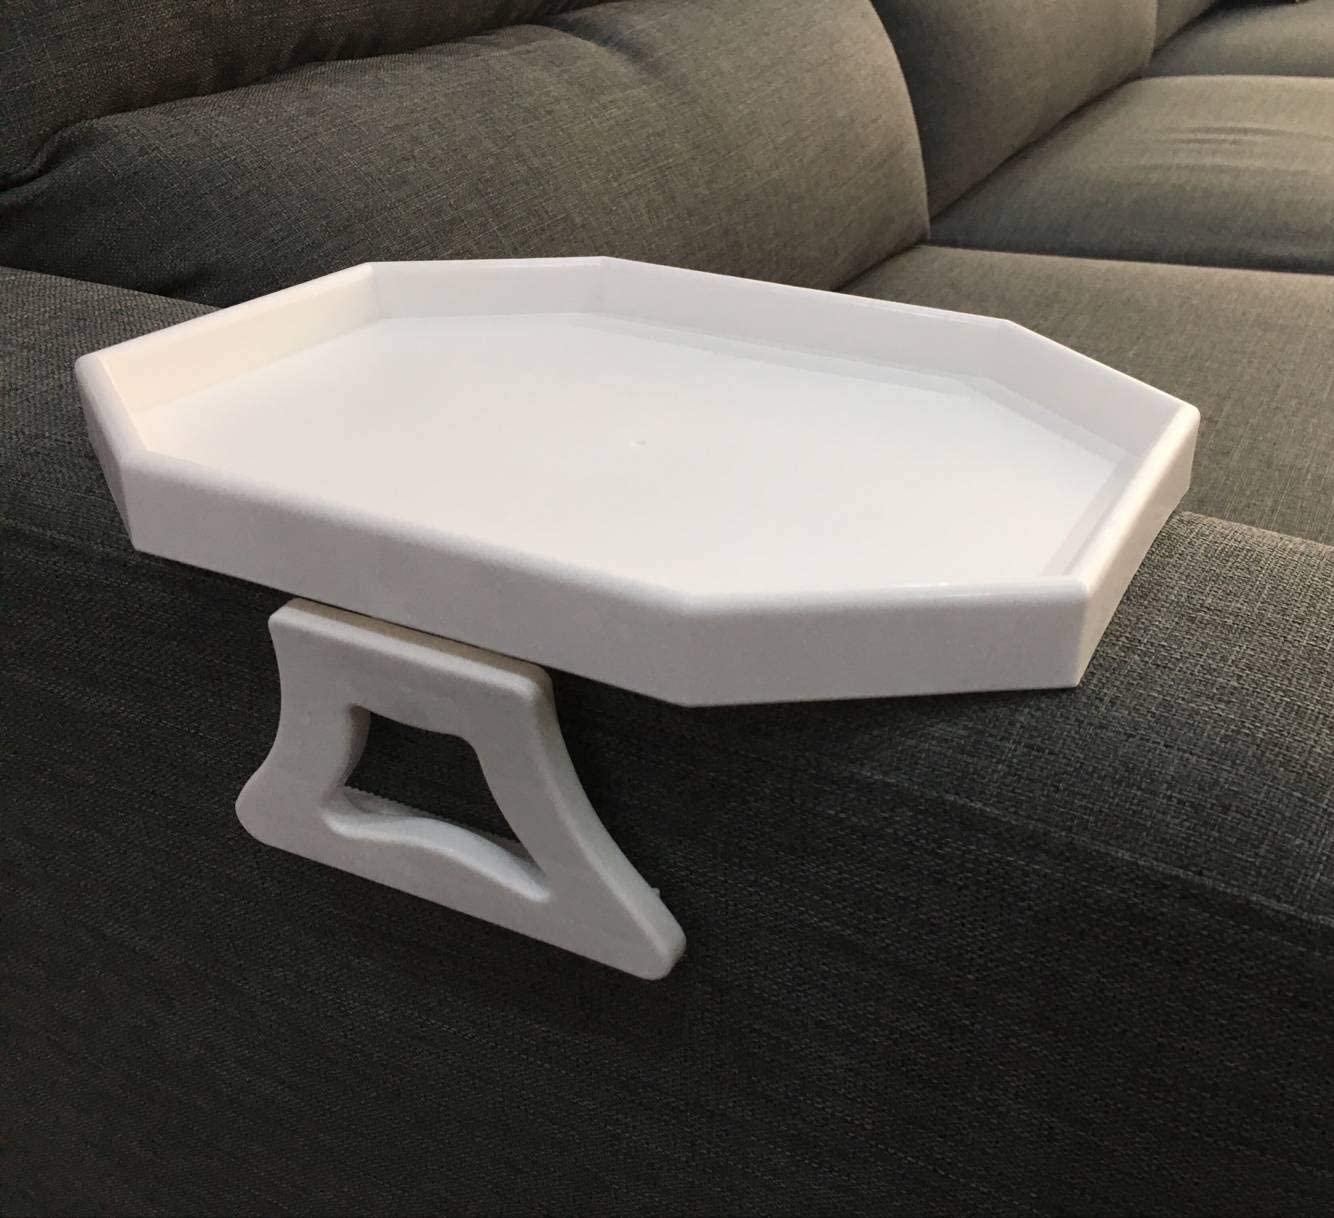 Sofa Tray Table Armrest Clip-On Arm Recliner Organizer Clip White